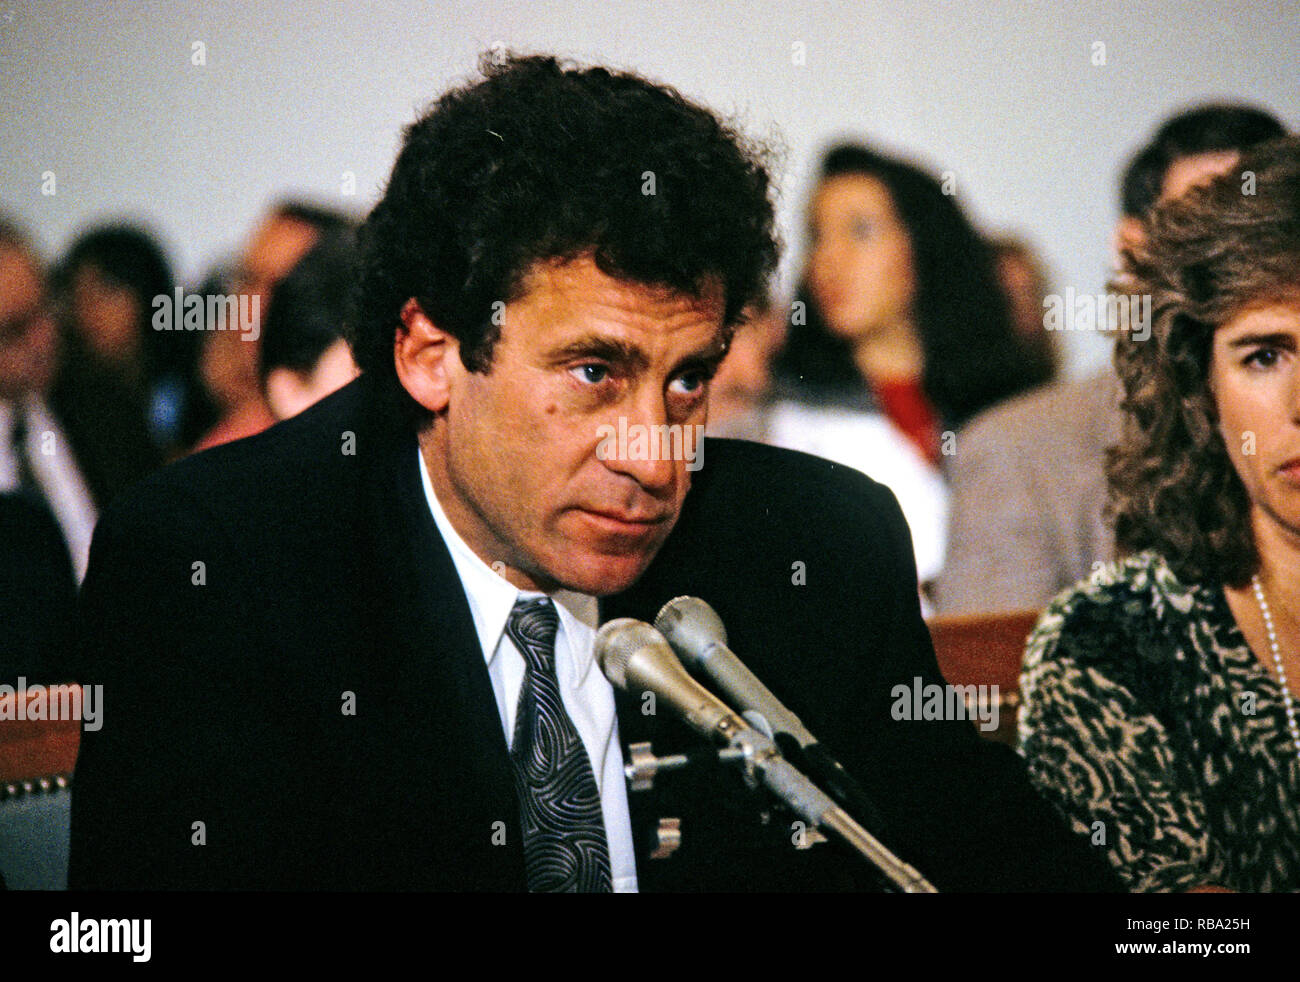 Actor and director Paul Michael Glaser, husband of Elizabeth Glaser,  testifies during a pediatric AIDS hearing before the United States House Budget Committee's Task Force on Human Resources on Capitol Hill in Washington, DC, March 13, 1990. Elizabeth Glaser contracted the AIDS virus after receiving an HIV-contaminated blood transfusion in 1981 while giving birth, subsequently infecting both of her children. One of his children, daughter Ariel, died in 1988 of the disease.  Mrs. Glaser passed away from the disease on December 3, 1994.    Credit: Howard Sachs / CNP /MediaPunch Stock Photo